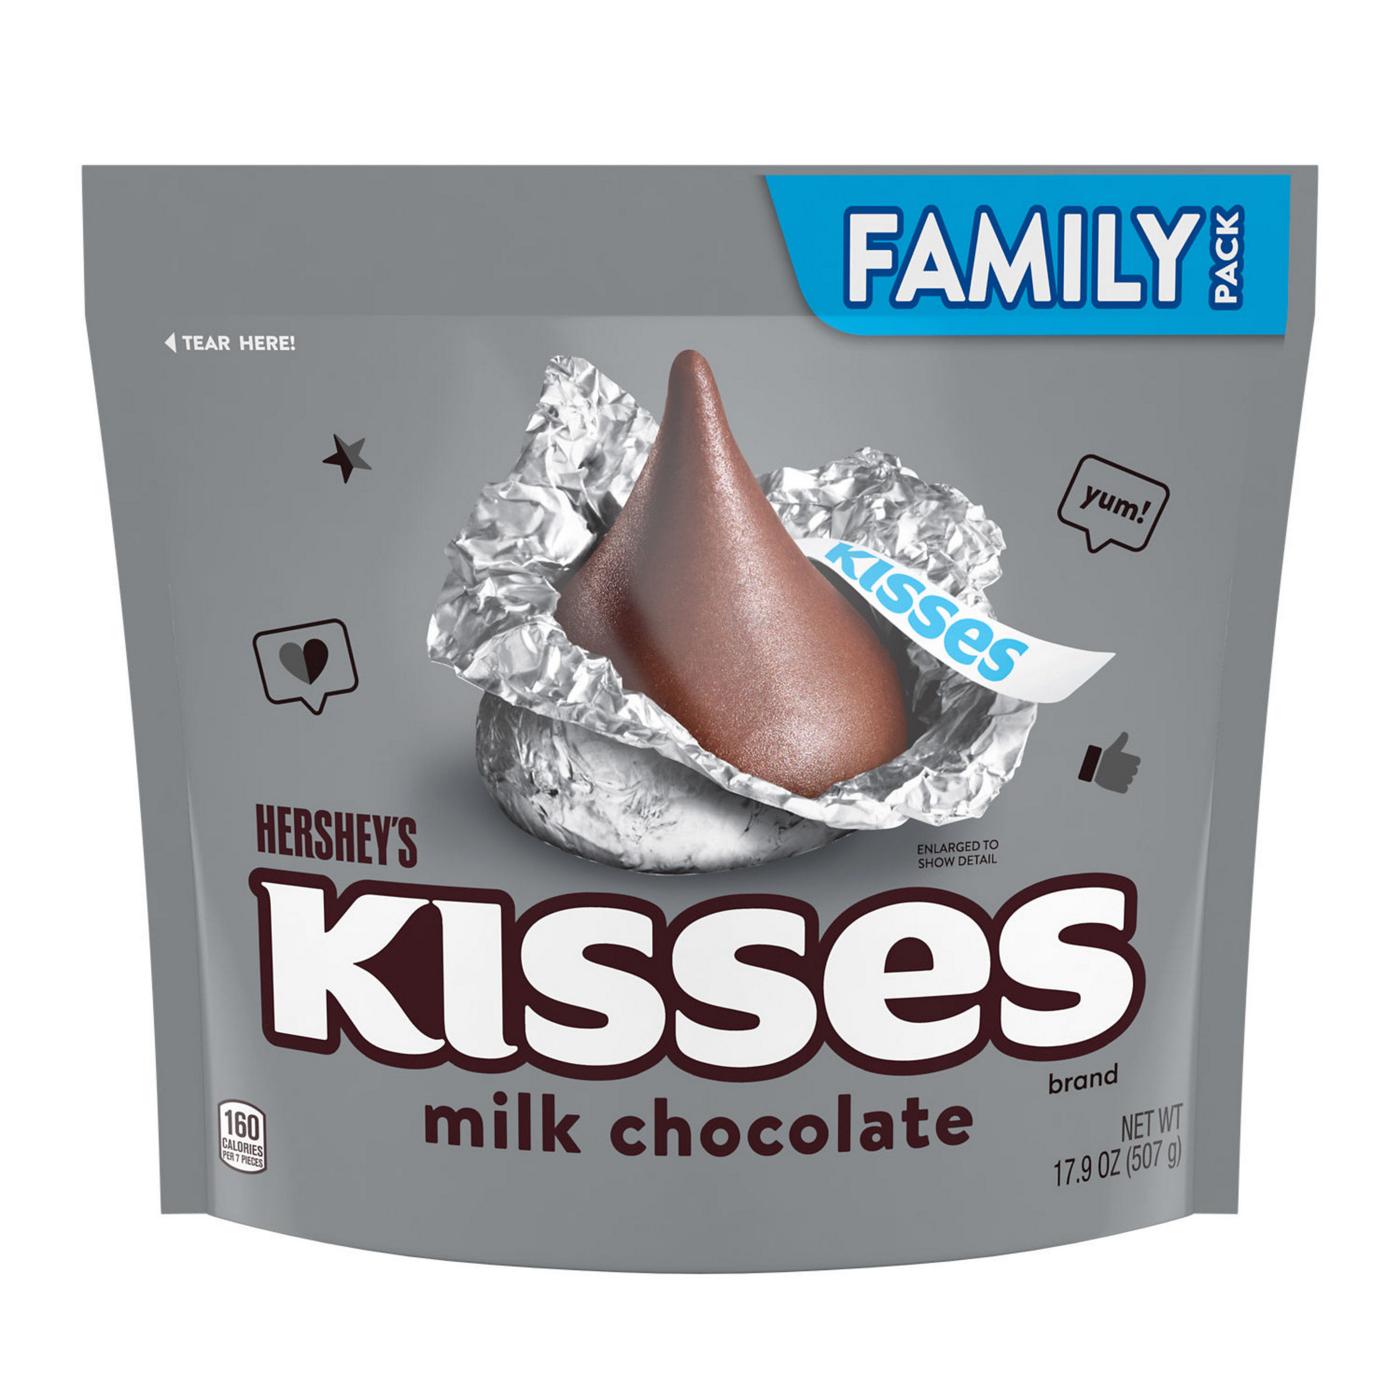 Hershey's Kisses Milk Chocolate Candy; image 1 of 7